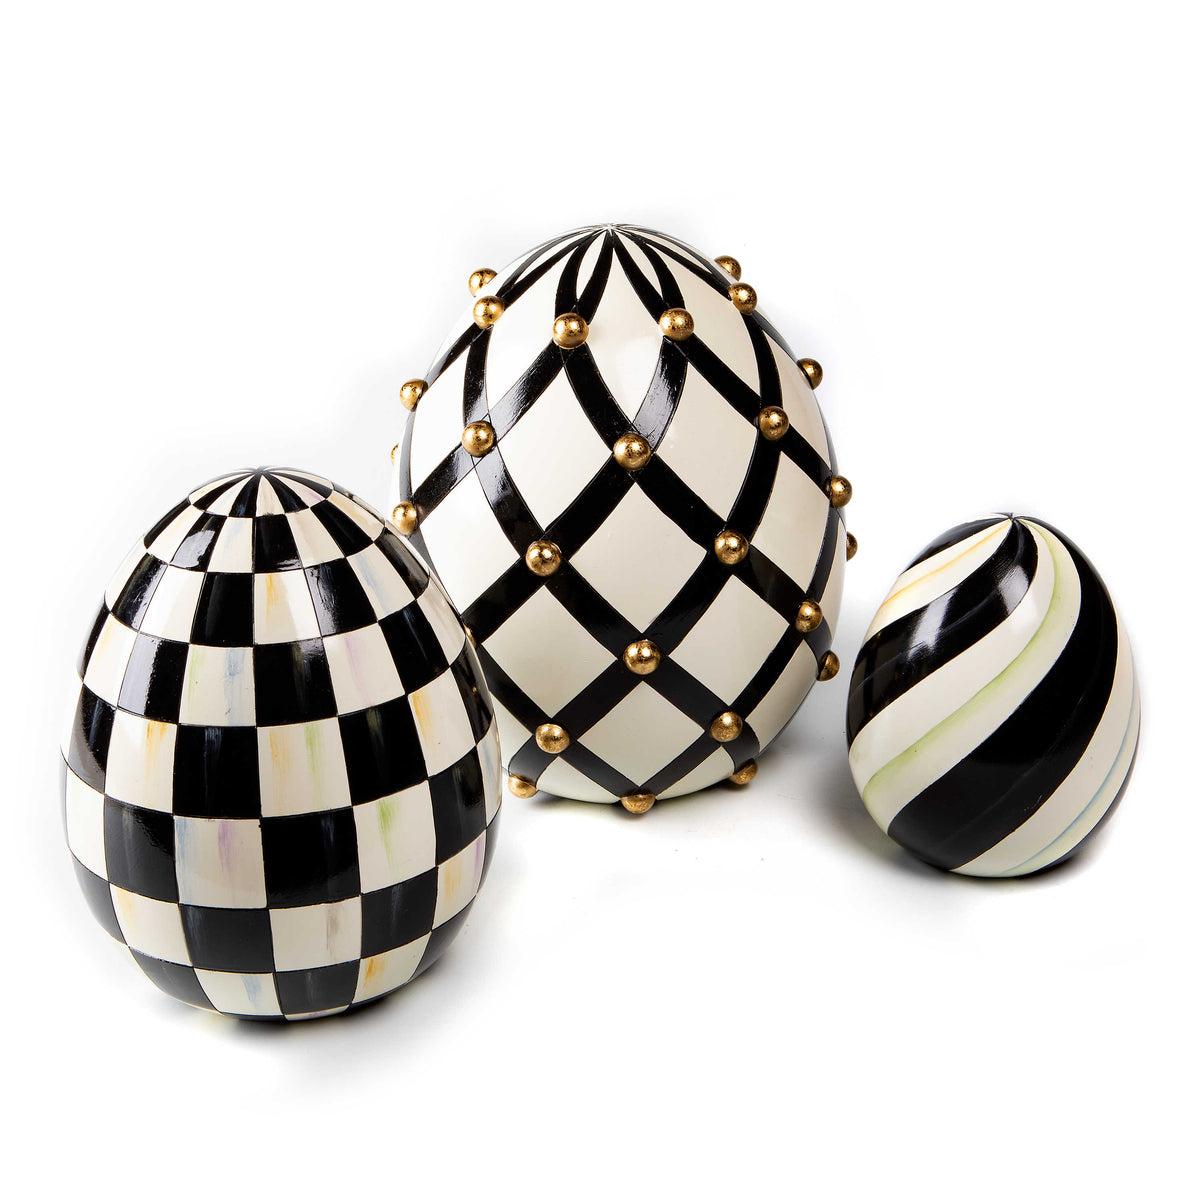 Courtly Coronation Eggs set of 3 SALE ITEM